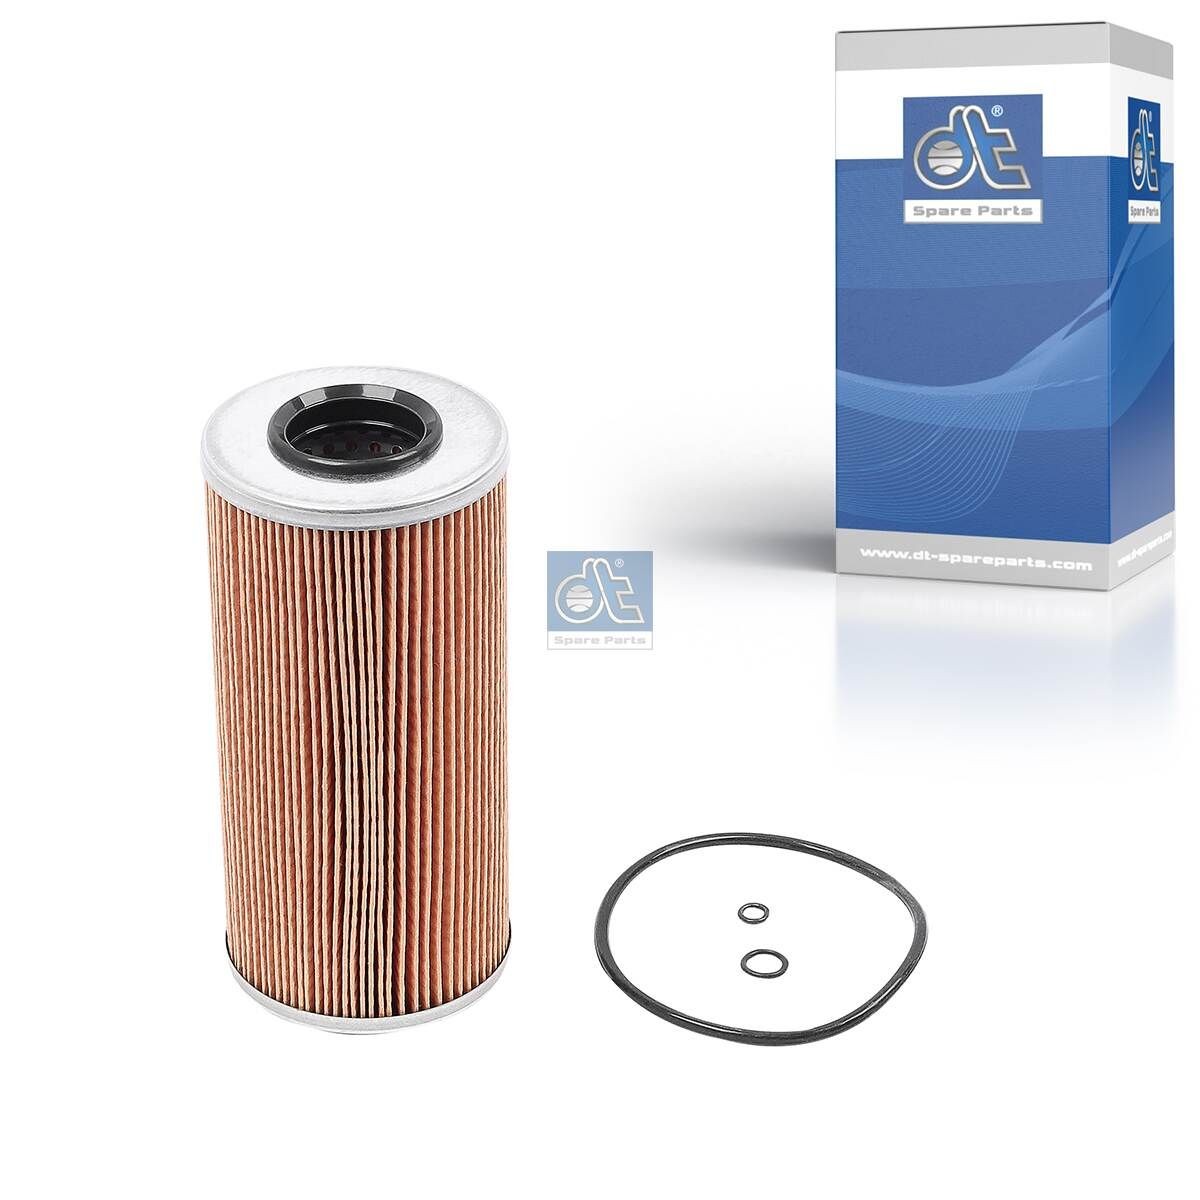 HU 951 x DT Spare Parts 3.14108 Oil filter 628 180 00 09